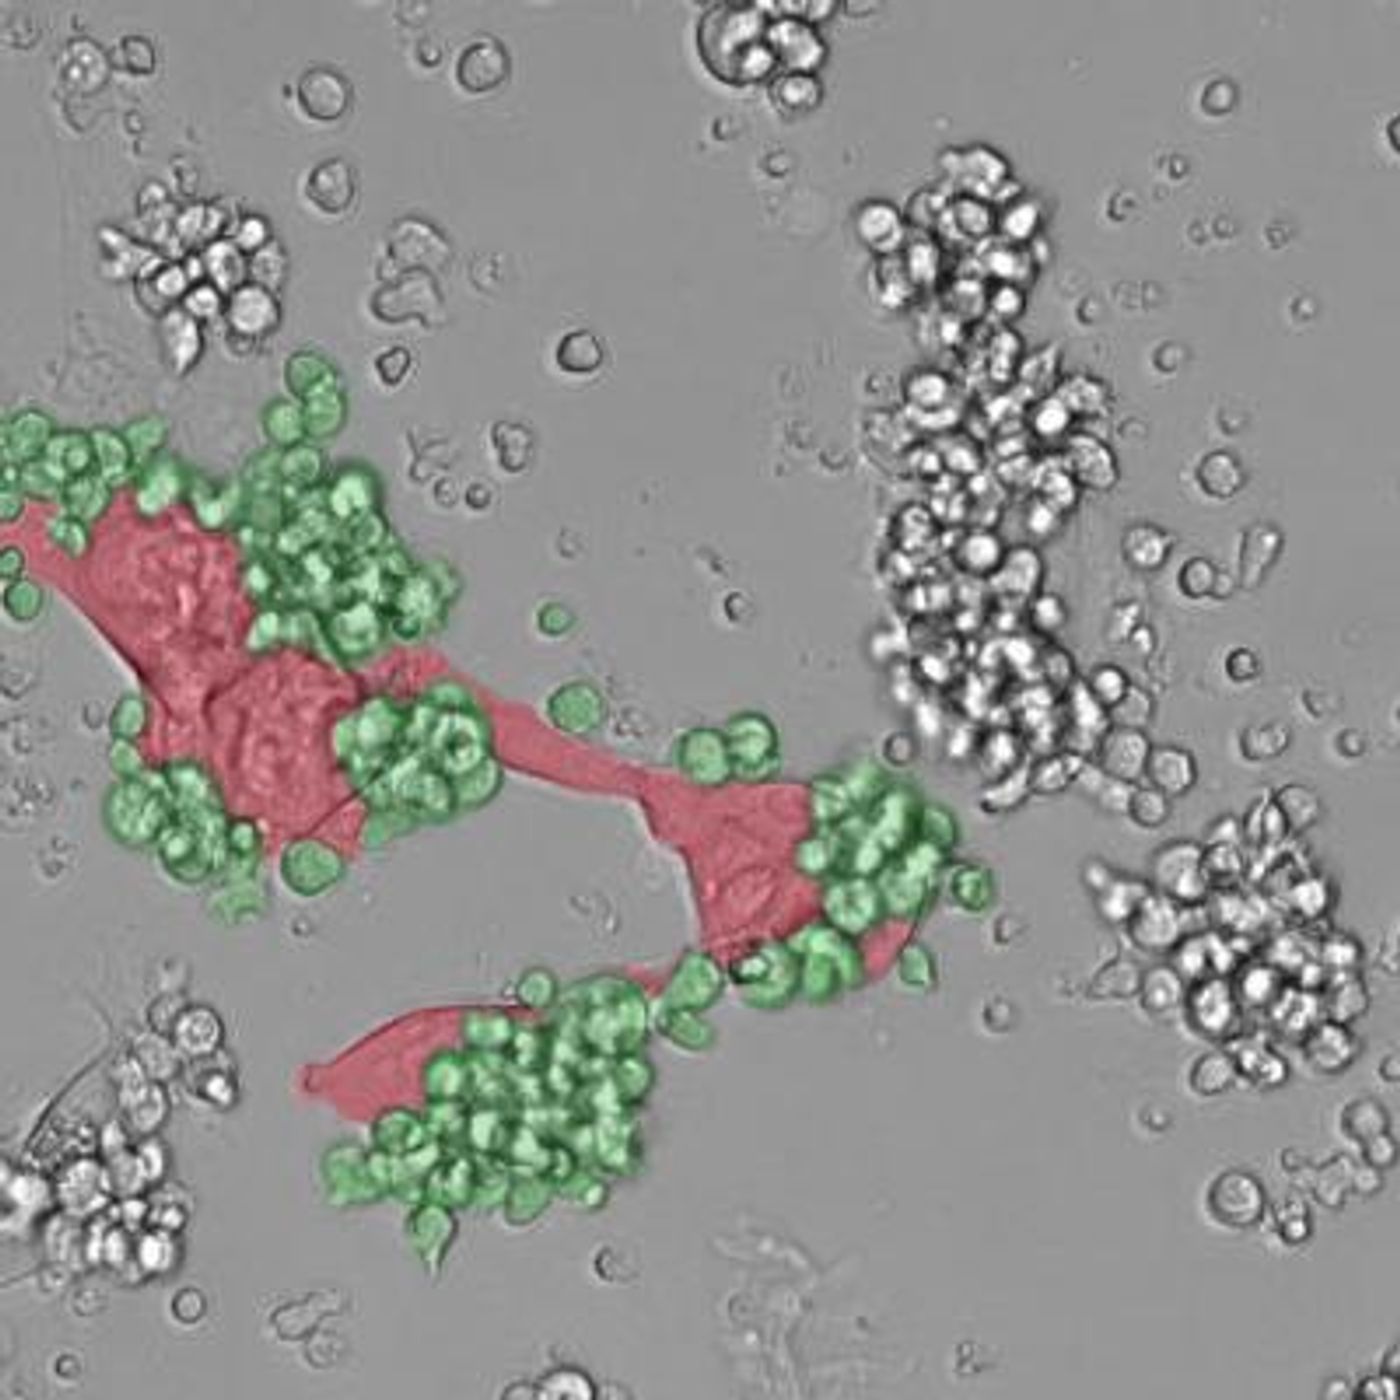 Immune cells (green) attacking tumor cells (red)